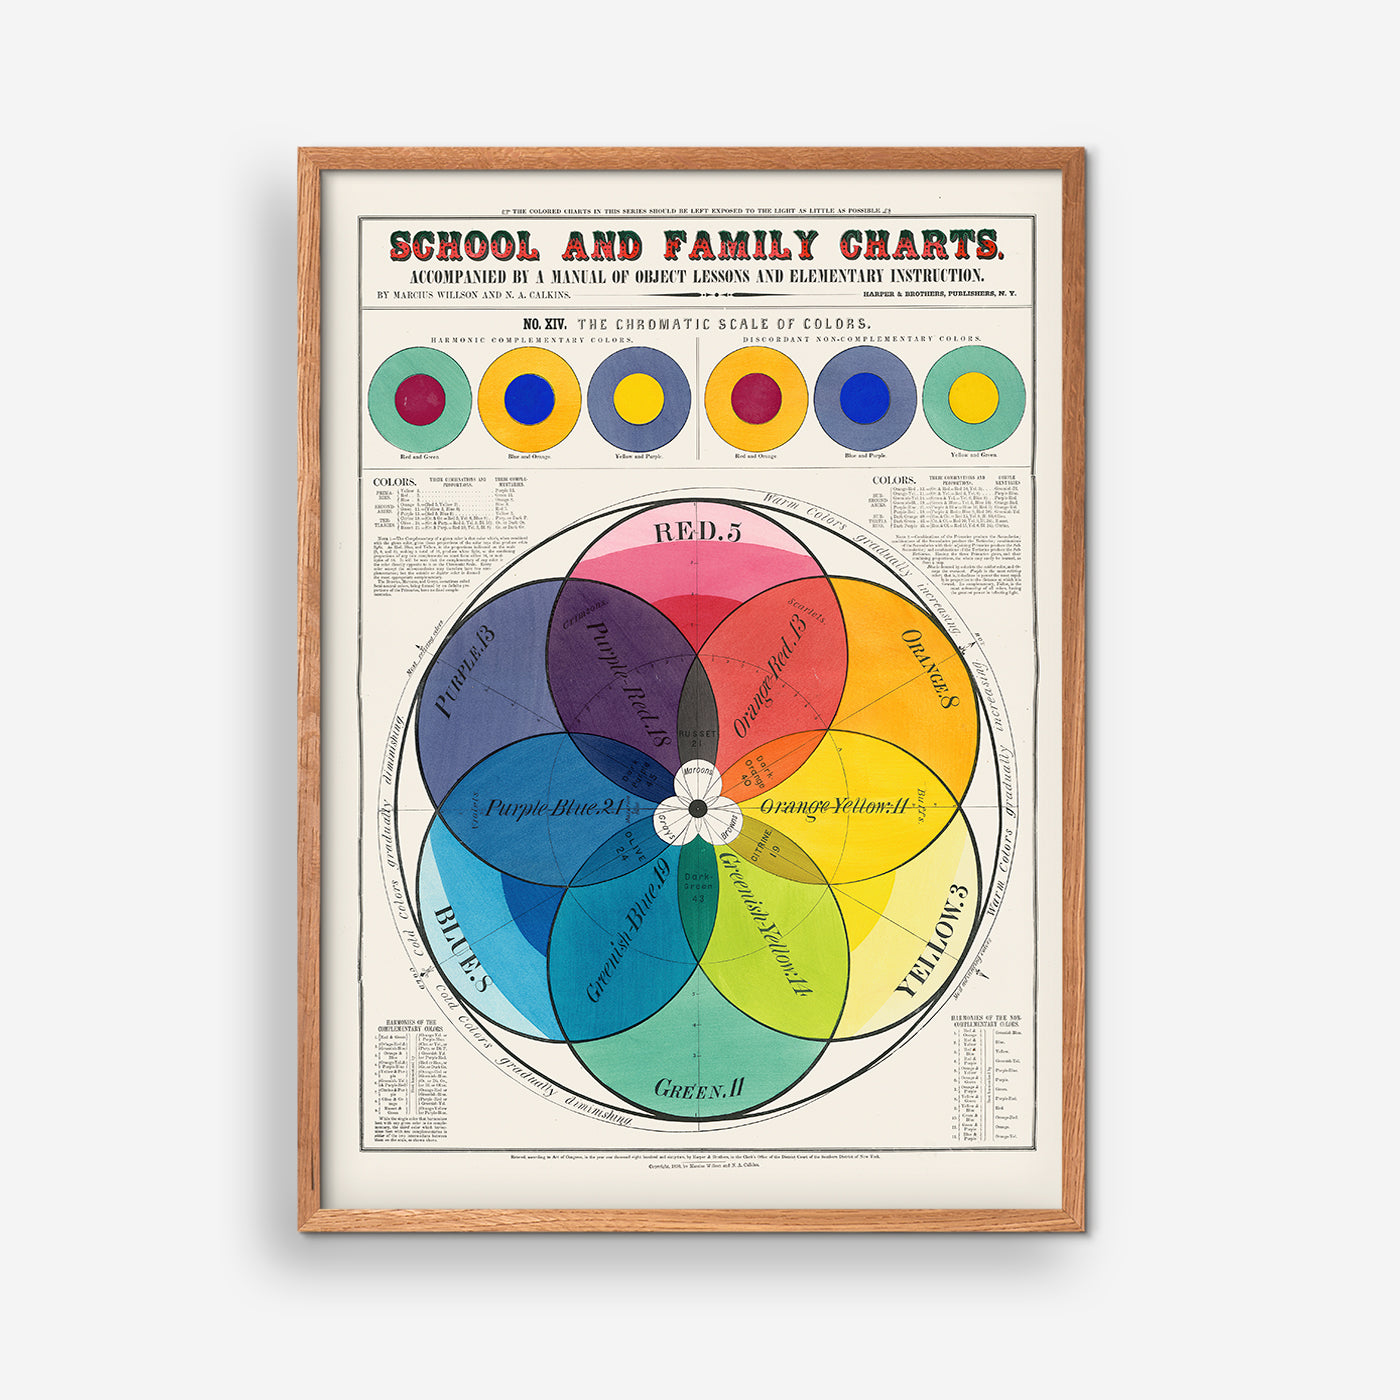 School and Family Charts